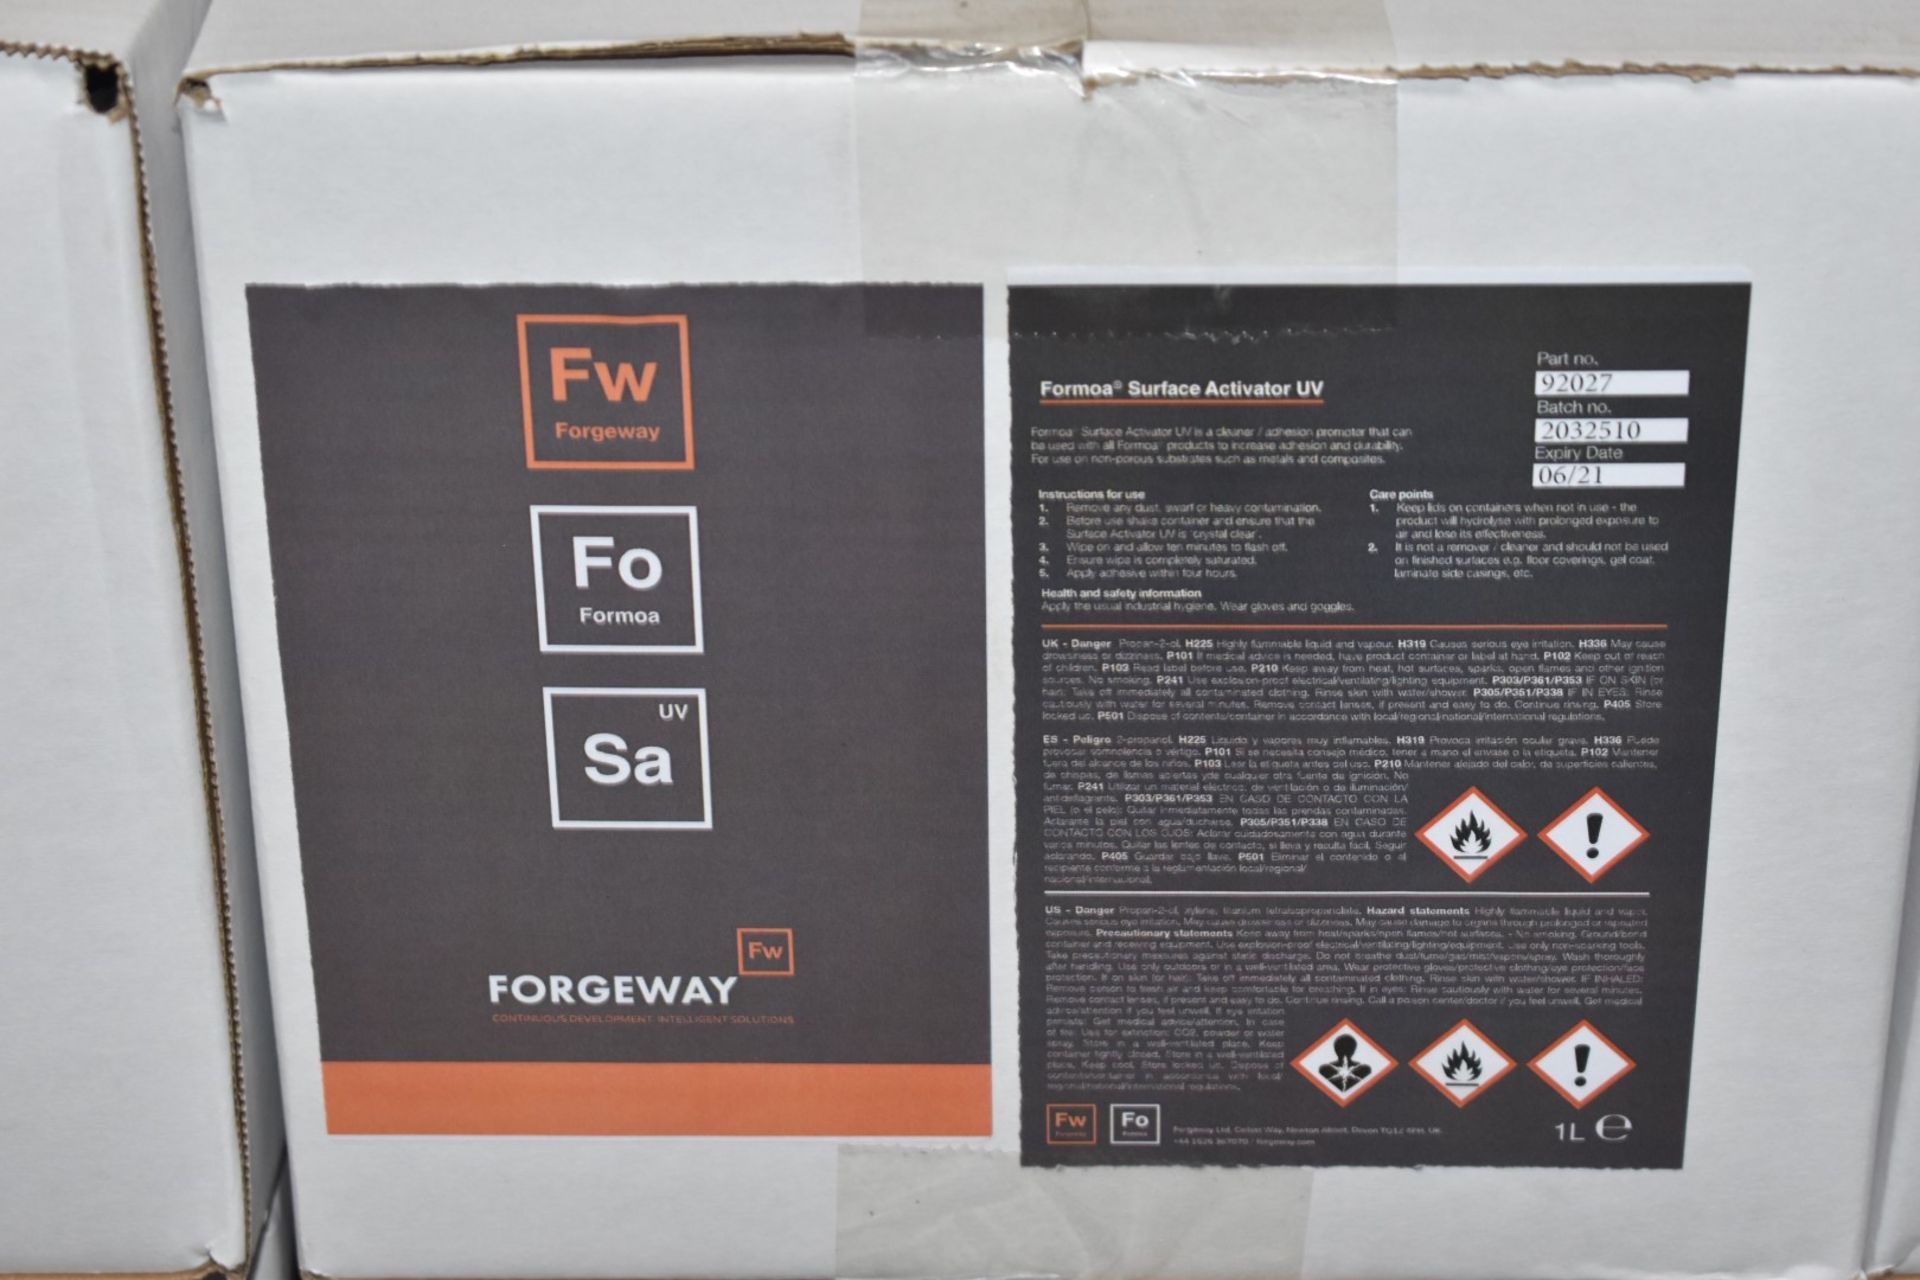 12 x Forgeway Formoa Surface Activator 1 Litre Containers - Adhesion Promotor, Cleaner, Degreaser - Image 4 of 6